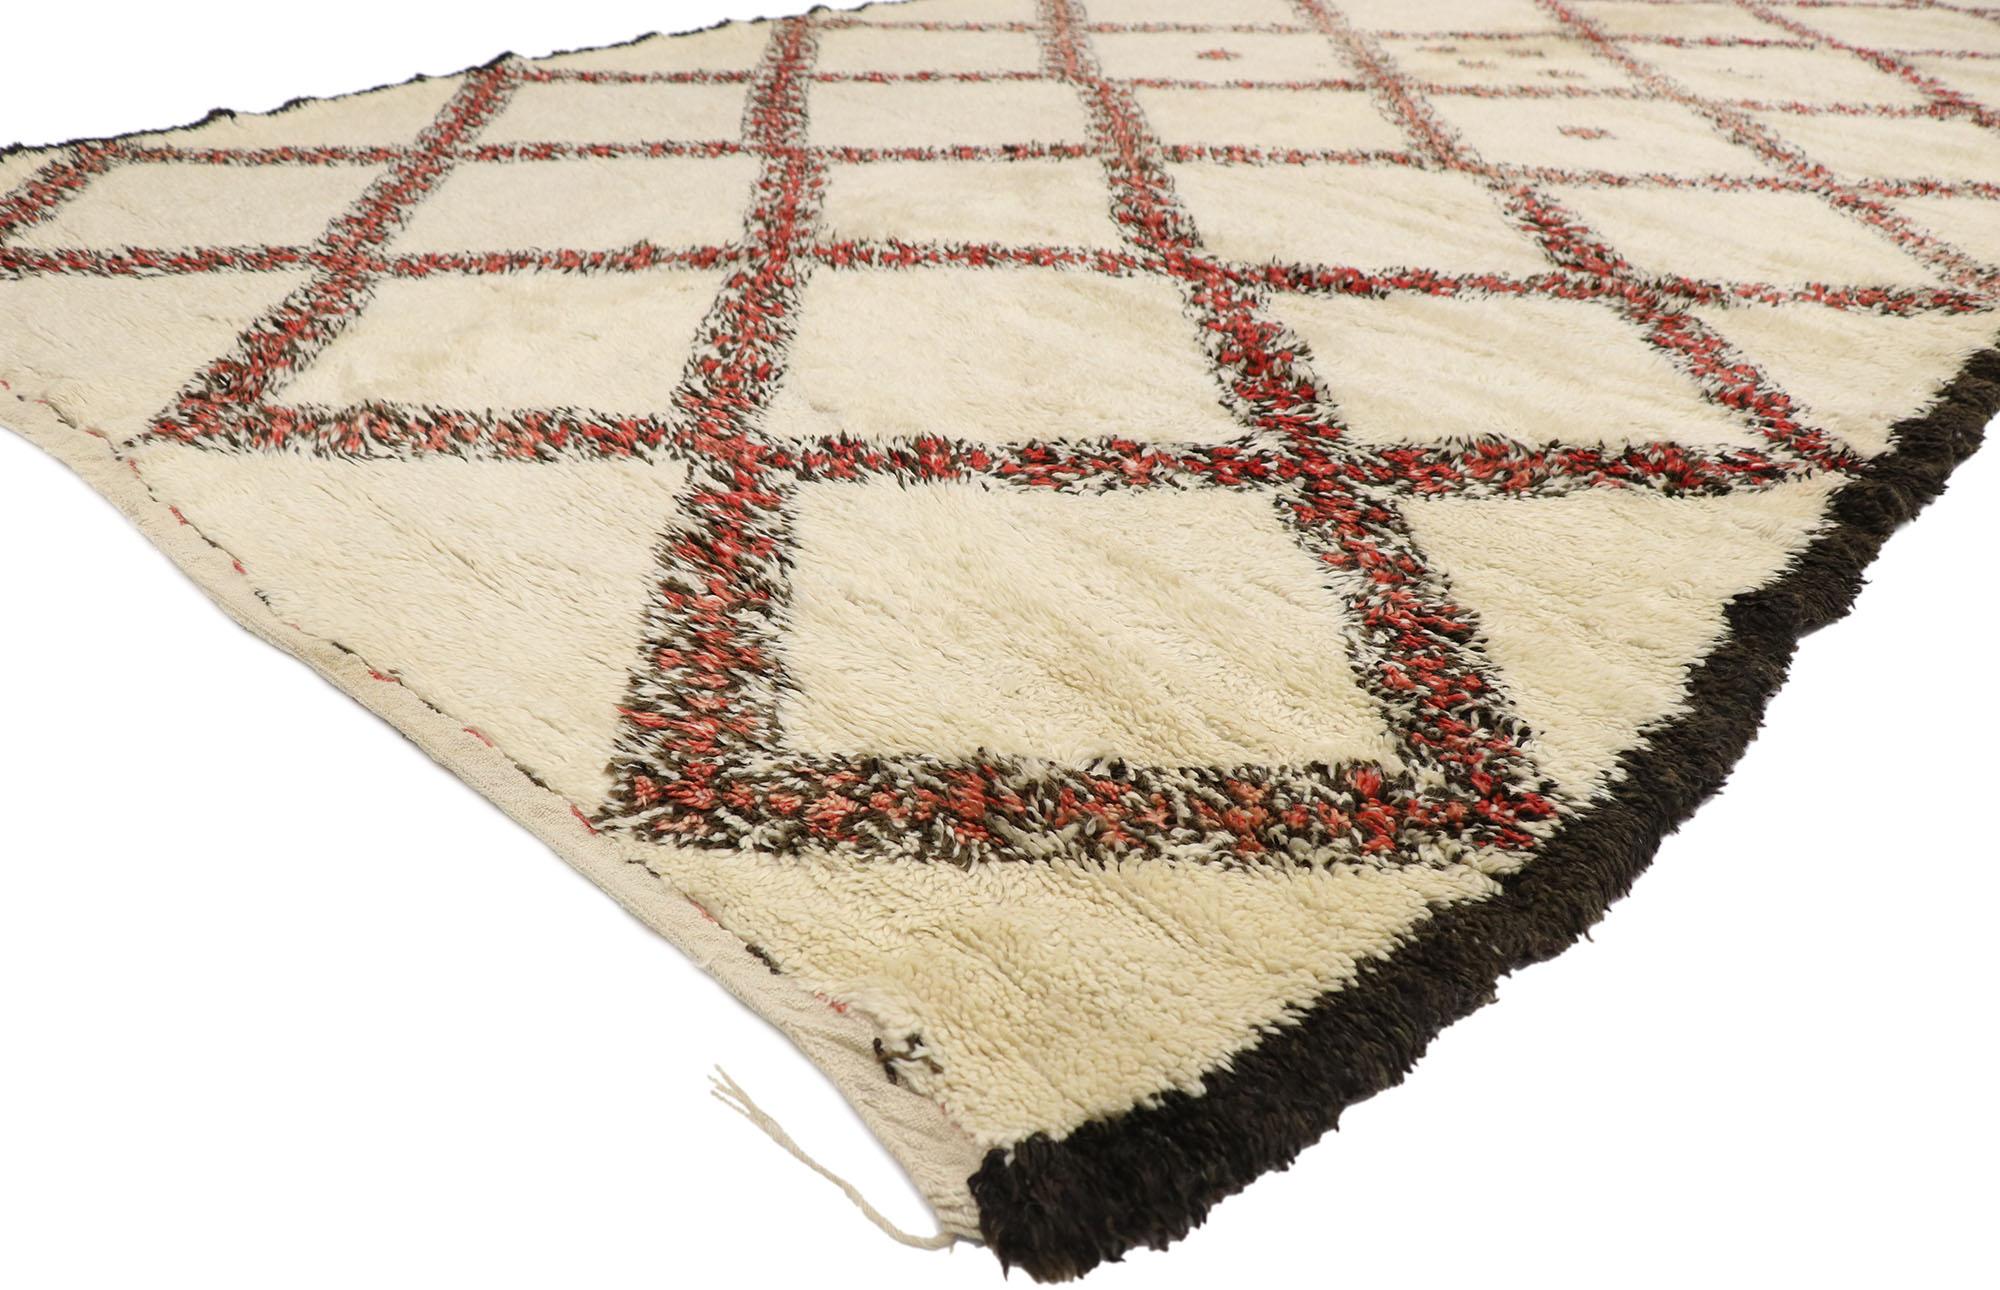 21354 Vintage Berber Beni Ourain Moroccan rug with Mid-Century Modern Style 06'11 x 13'03. With its simplicity, plush pile and Mid-Century Modern style, this hand knotted wool vintage Berber Beni Ourain Moroccan rug is a captivating vision of woven